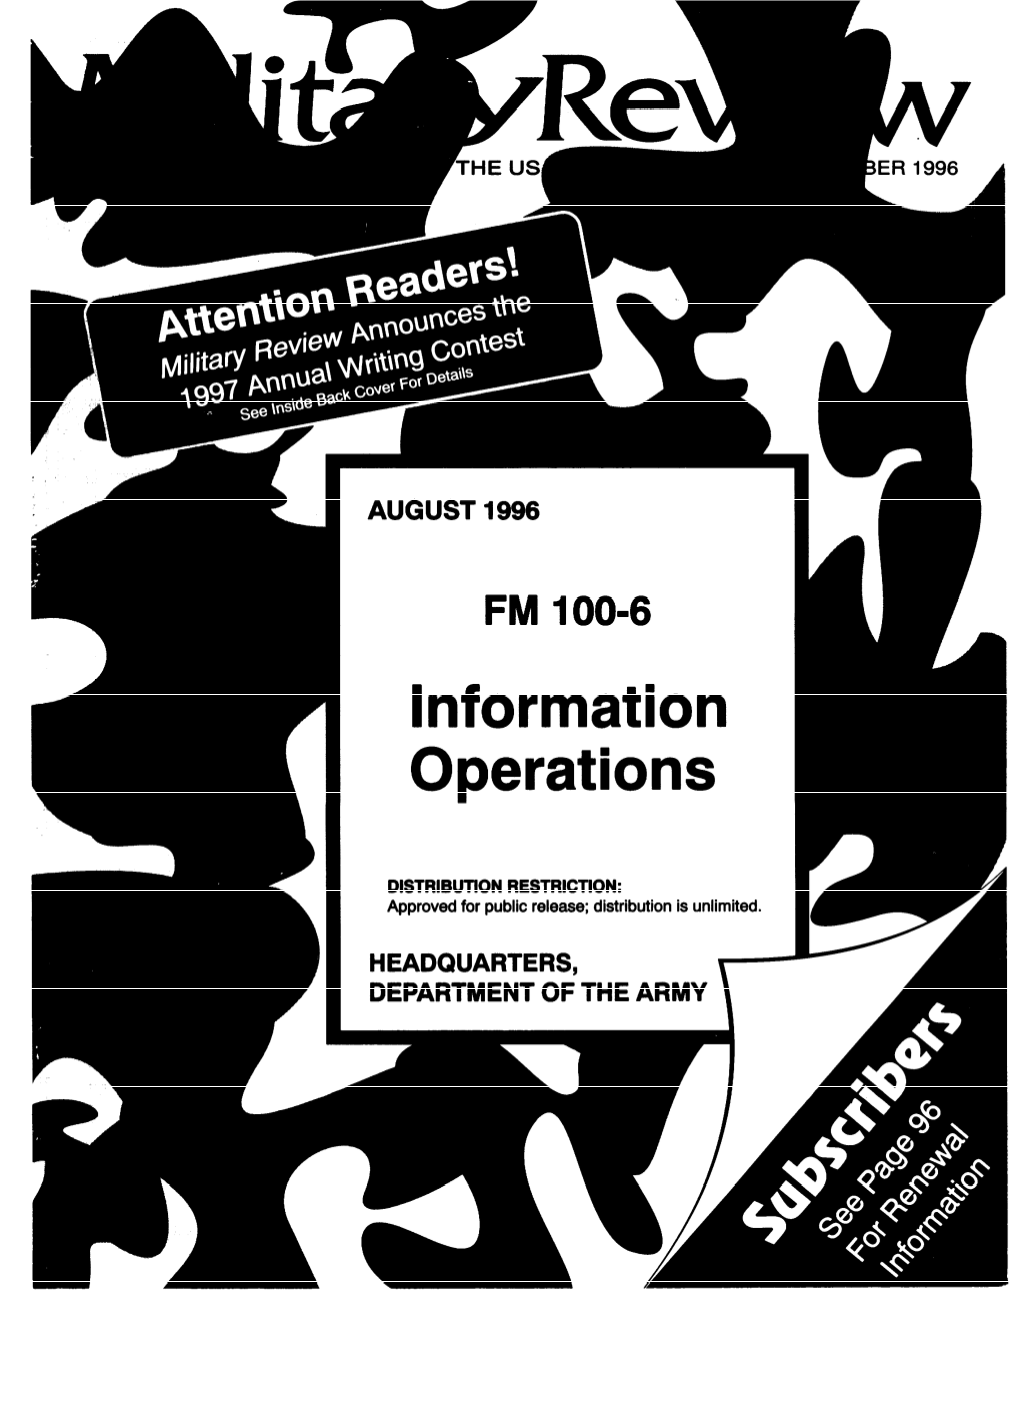 Information Operations